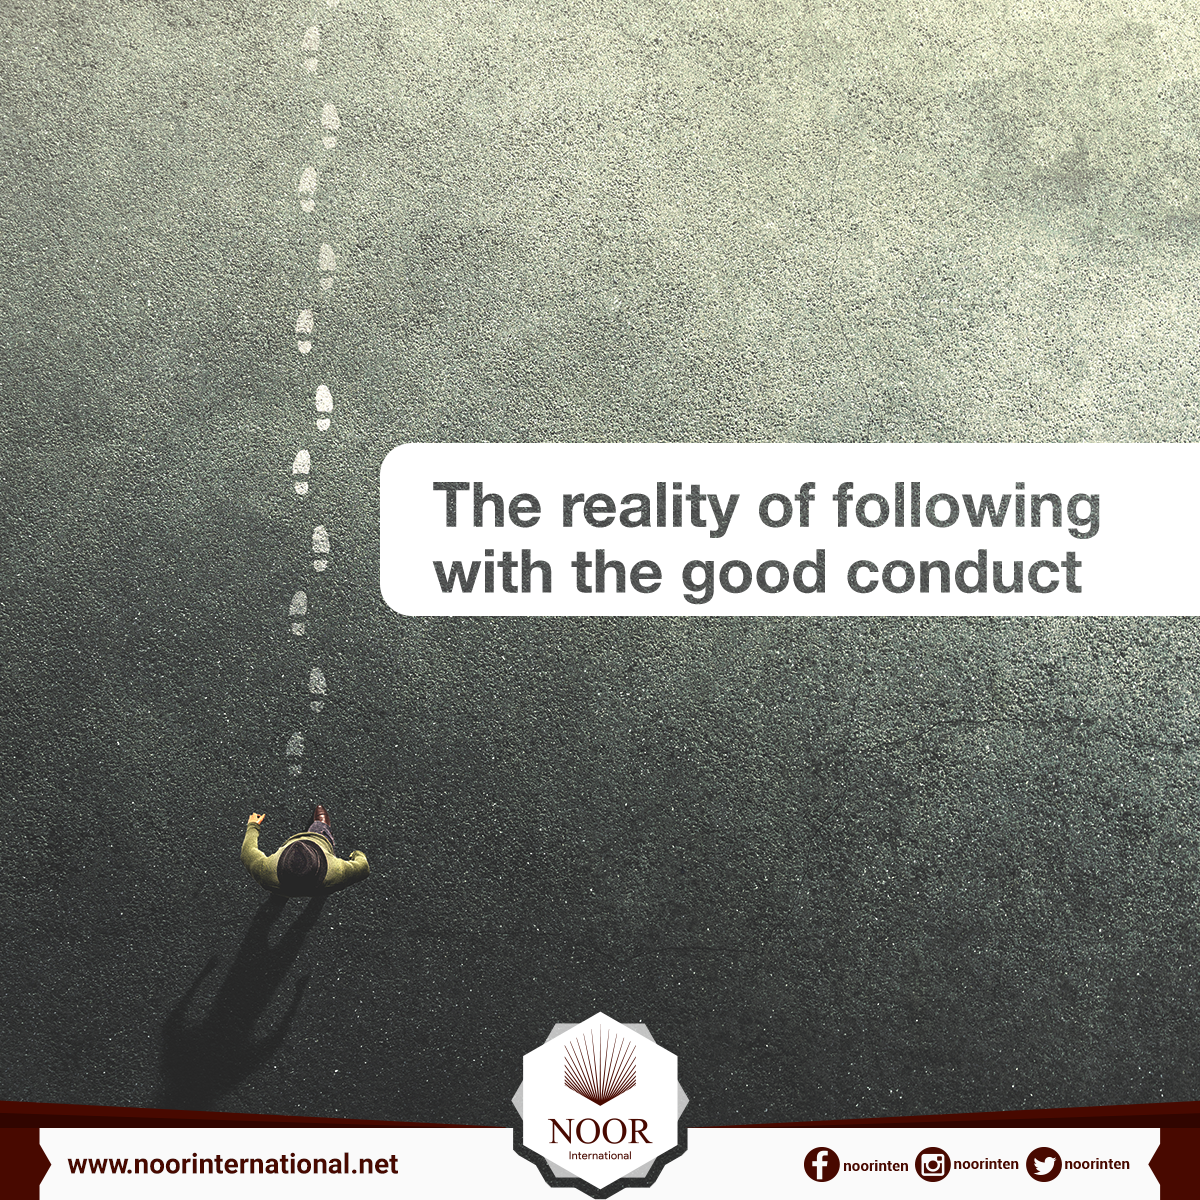 The reality of following with the good conduct